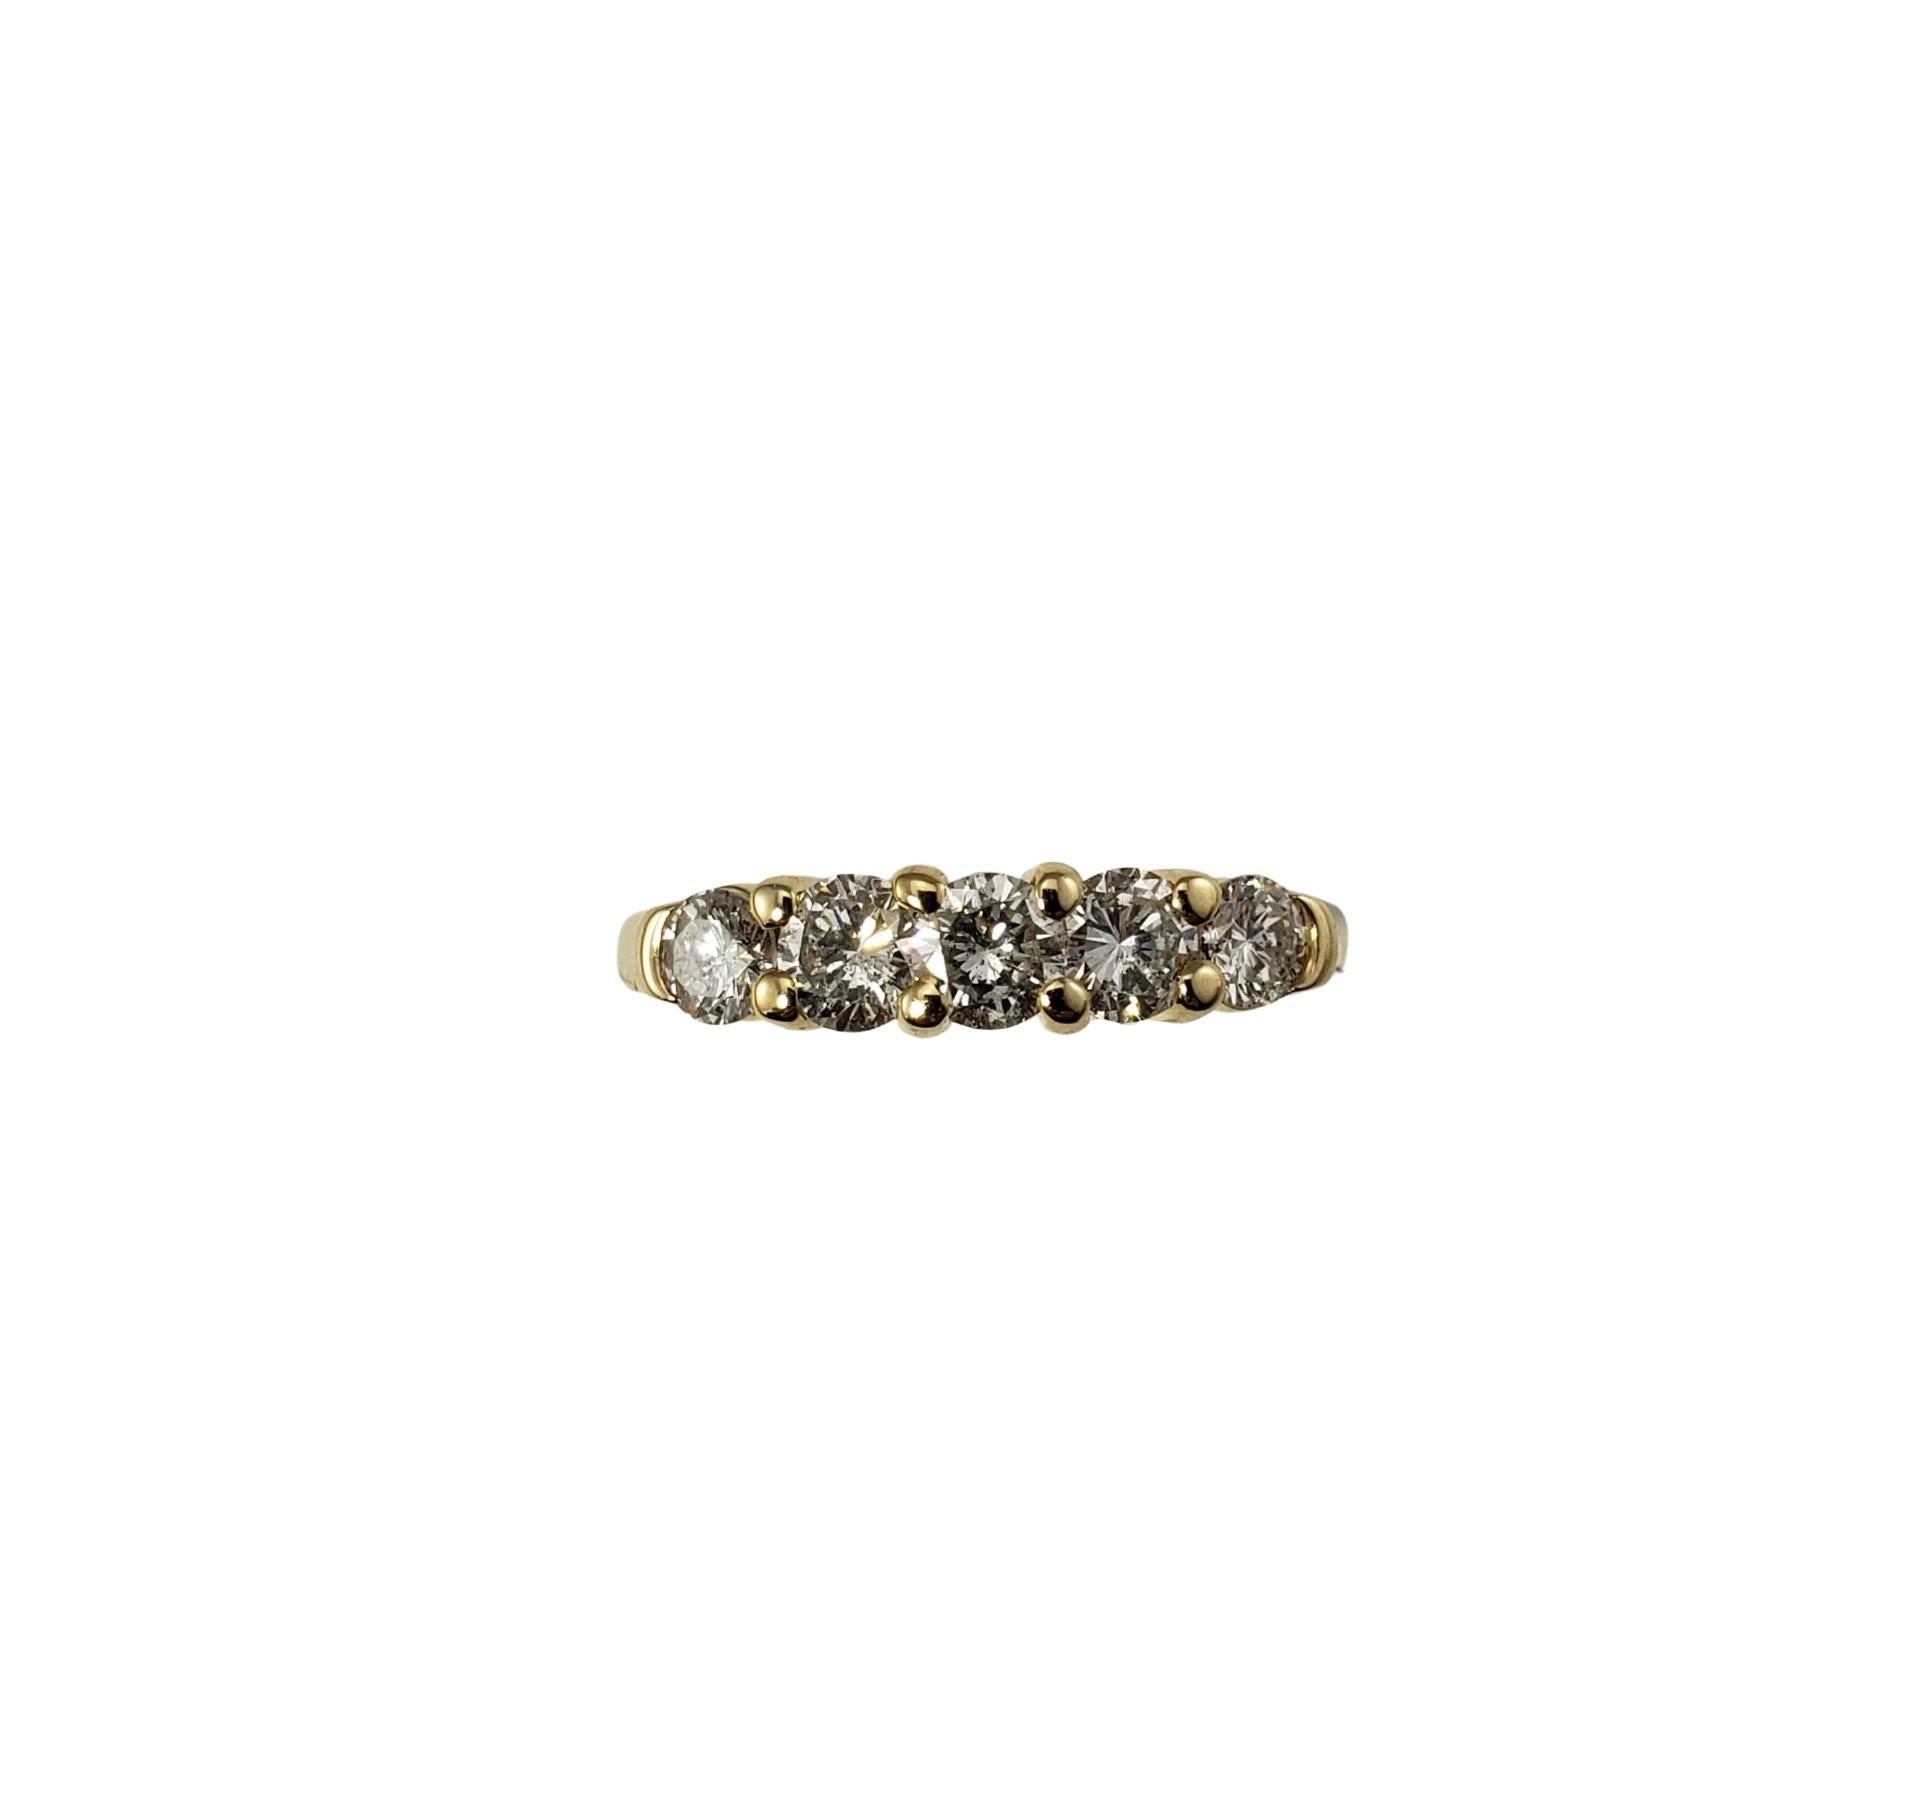 14 Karat Yellow Gold Diamond Wedding Band Ring Size 6.75-

This sparkling ring features five round brilliant cut diamonds set in classic 14K yellow gold.  Shank: 2 mm.  Width:  4 mm.

Approximate total diamond weight:  1.04 ct.

Diamond color: 